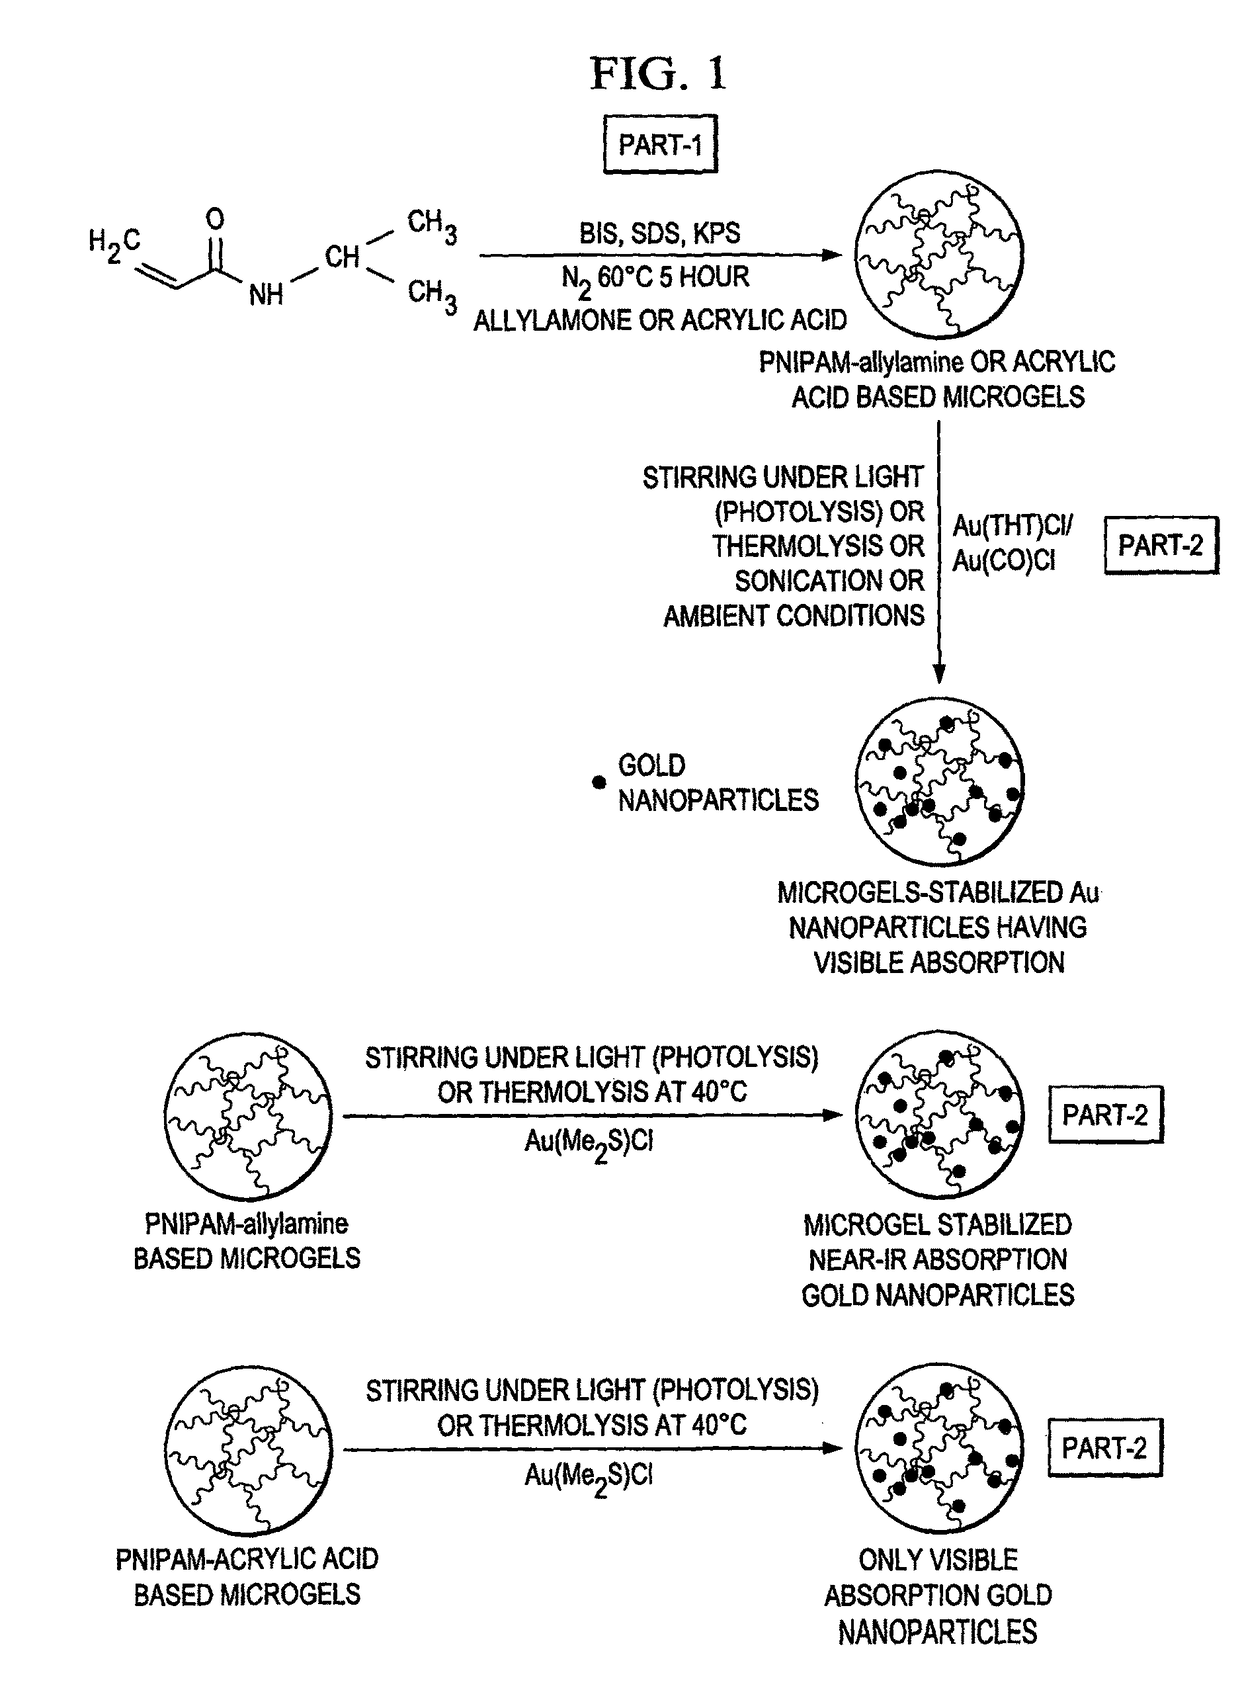 Facile method for making non-toxic biomedical compositions comprising hybrid metal-polymer microparticles